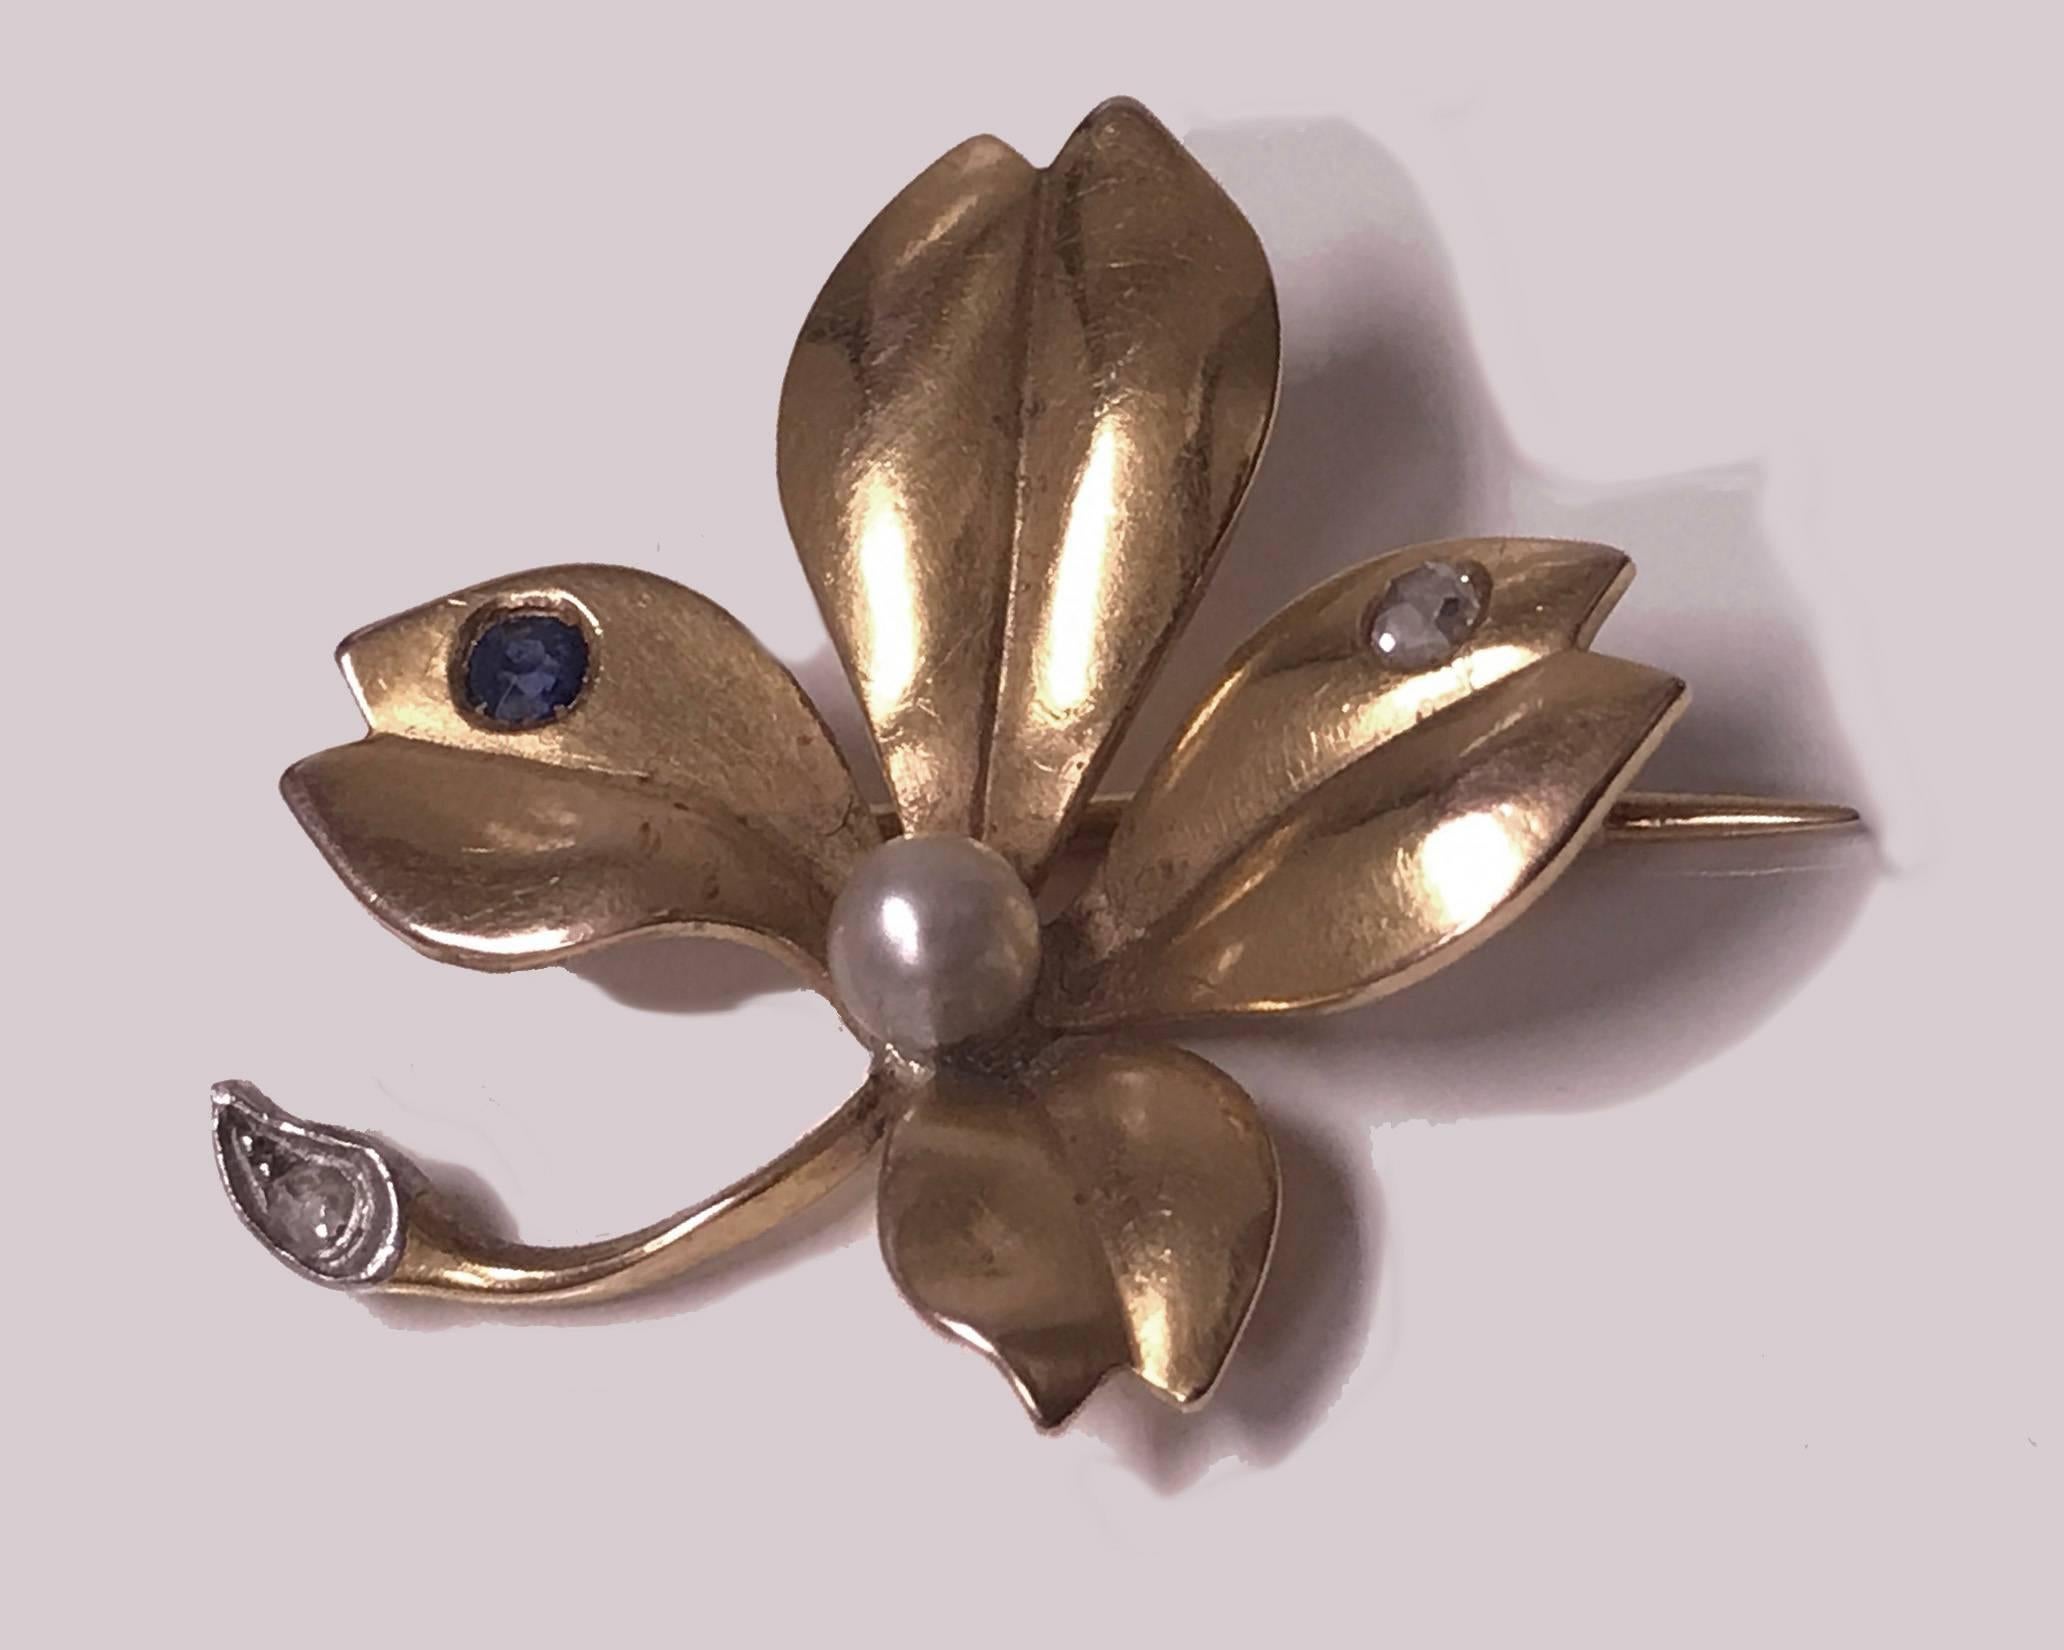 18K yellow gold, Sapphire, Diamond and Pearl Brooch in the form of a flower. France c.1900. The brooch of a four petal design, matte gold finish set with two small rose cut diamonds and a Blue Sapphire, centering a good quality cultured pearl,